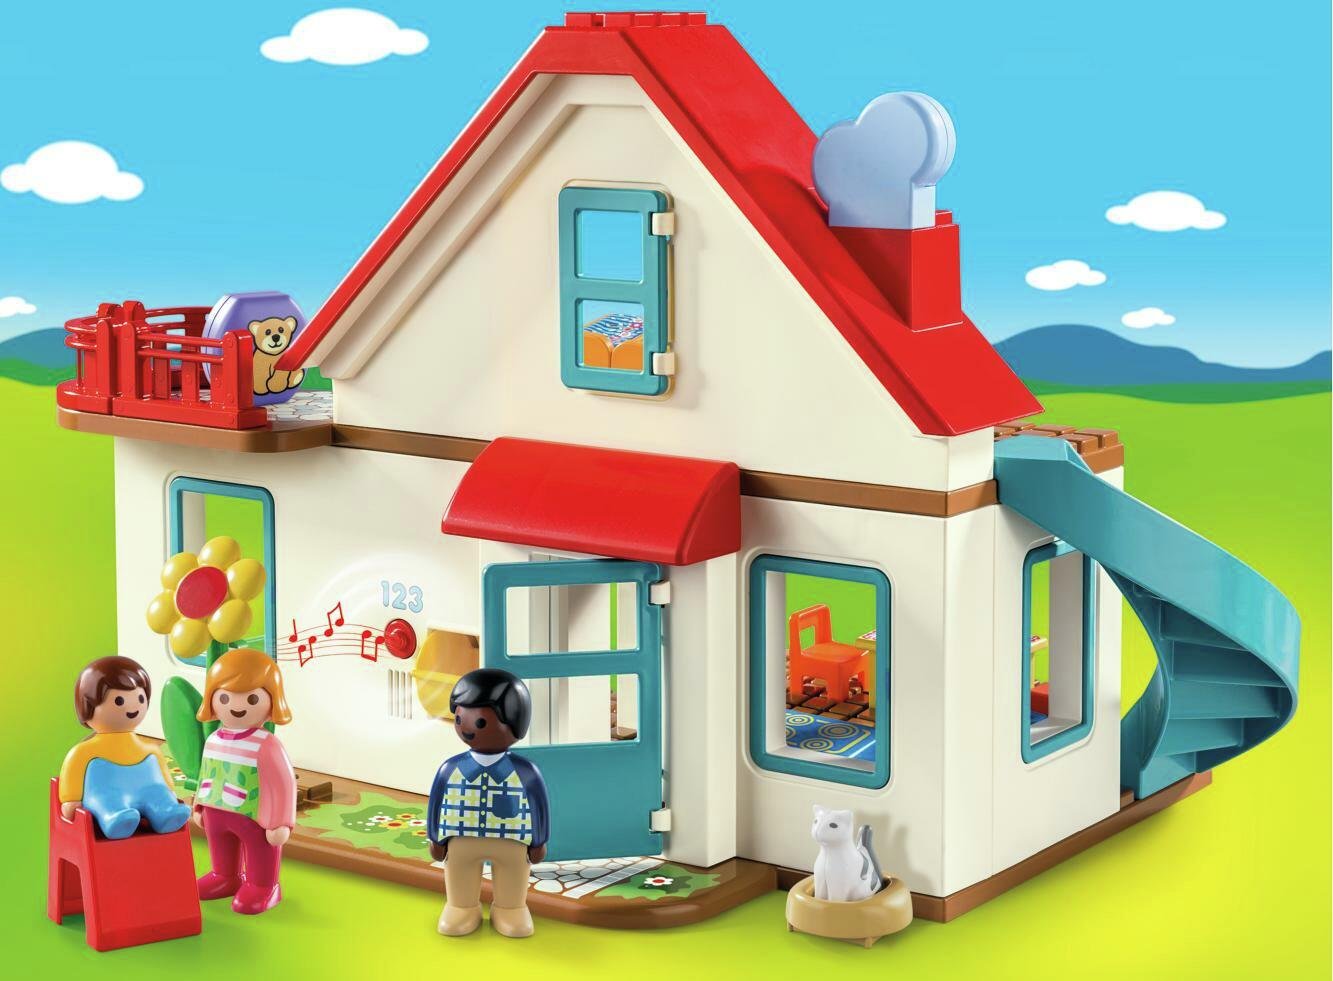 Playmobil 70129 1/2/3 Family Home Playset Review